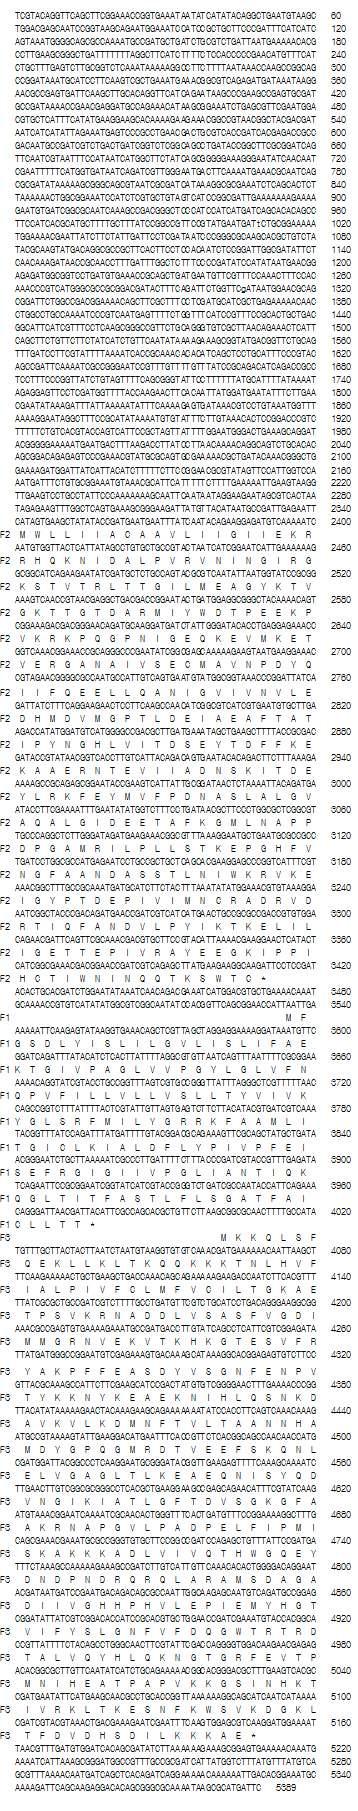 Nucleotide sequence of 5.3 kb region encompassing pgsBCA